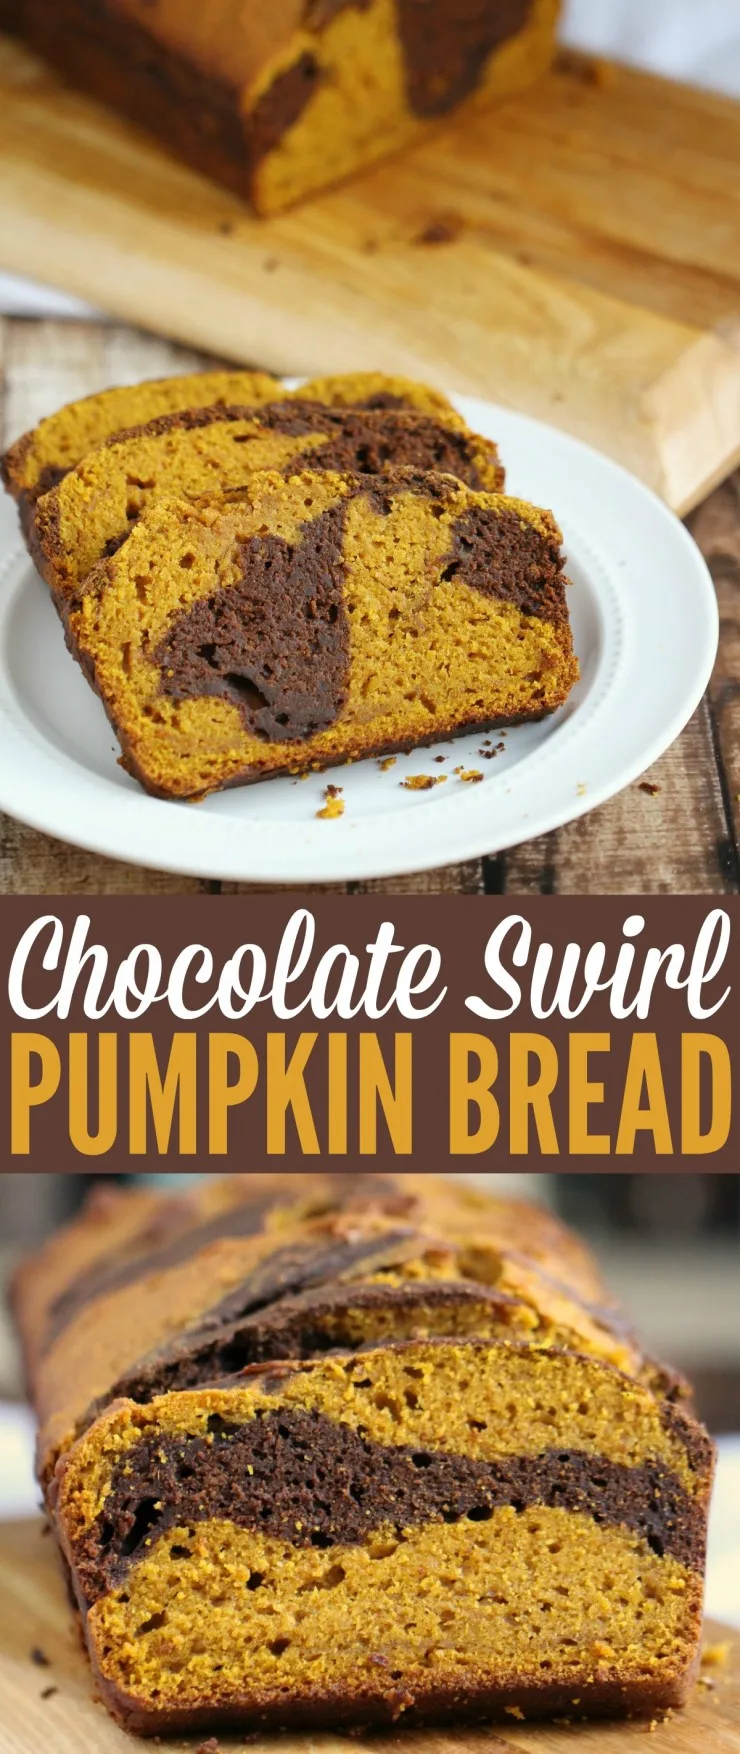  This Chocolate Swirl Pumpkin Bread is a wonderful fall dessert perfect for serving on Thanksgiving!